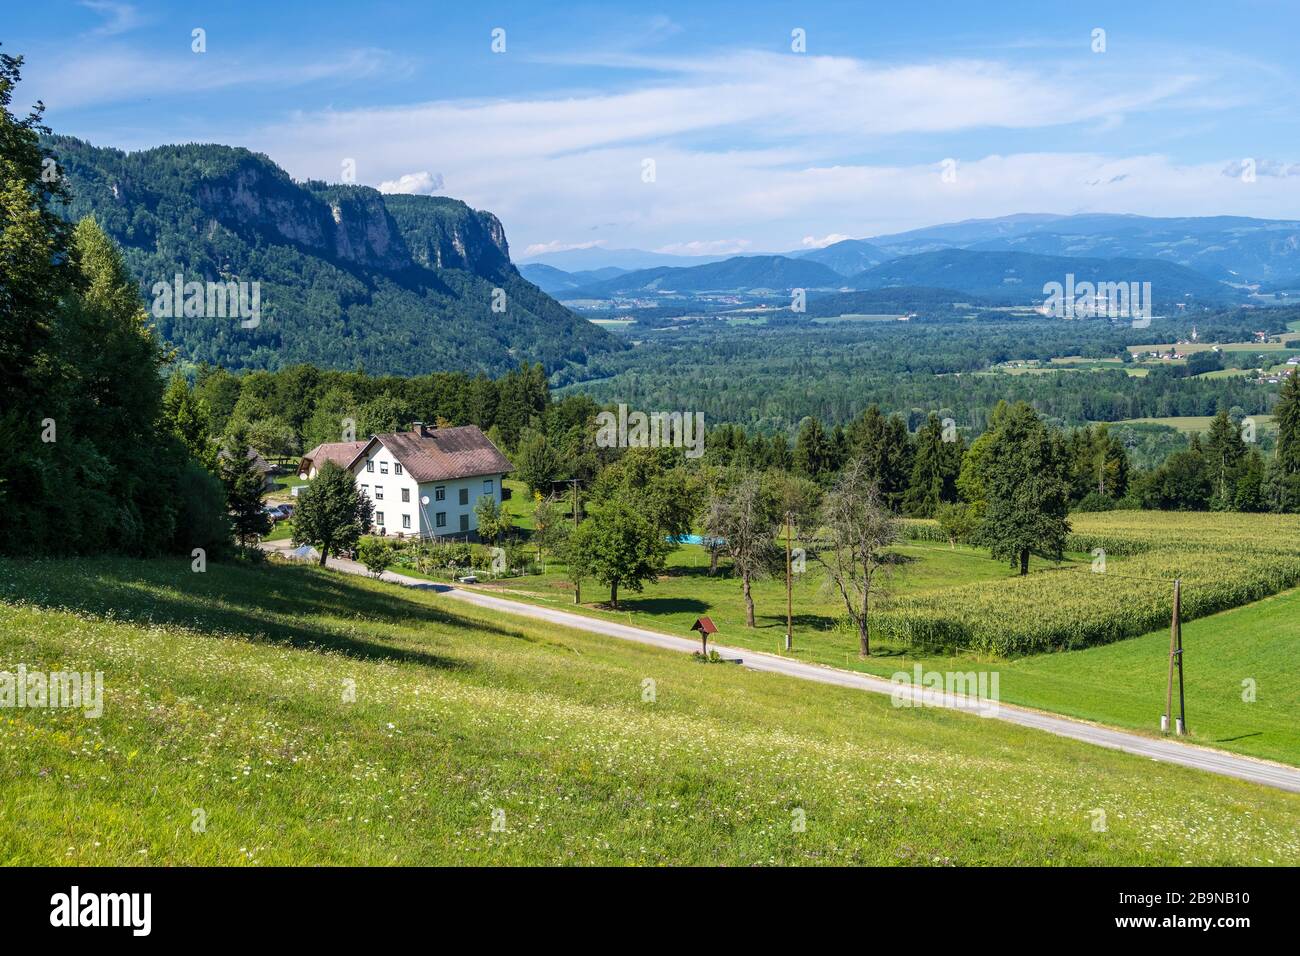 Alpine Scenery. Landscape of Carinthia in Austria with Alpine hills and valley Stock Photo